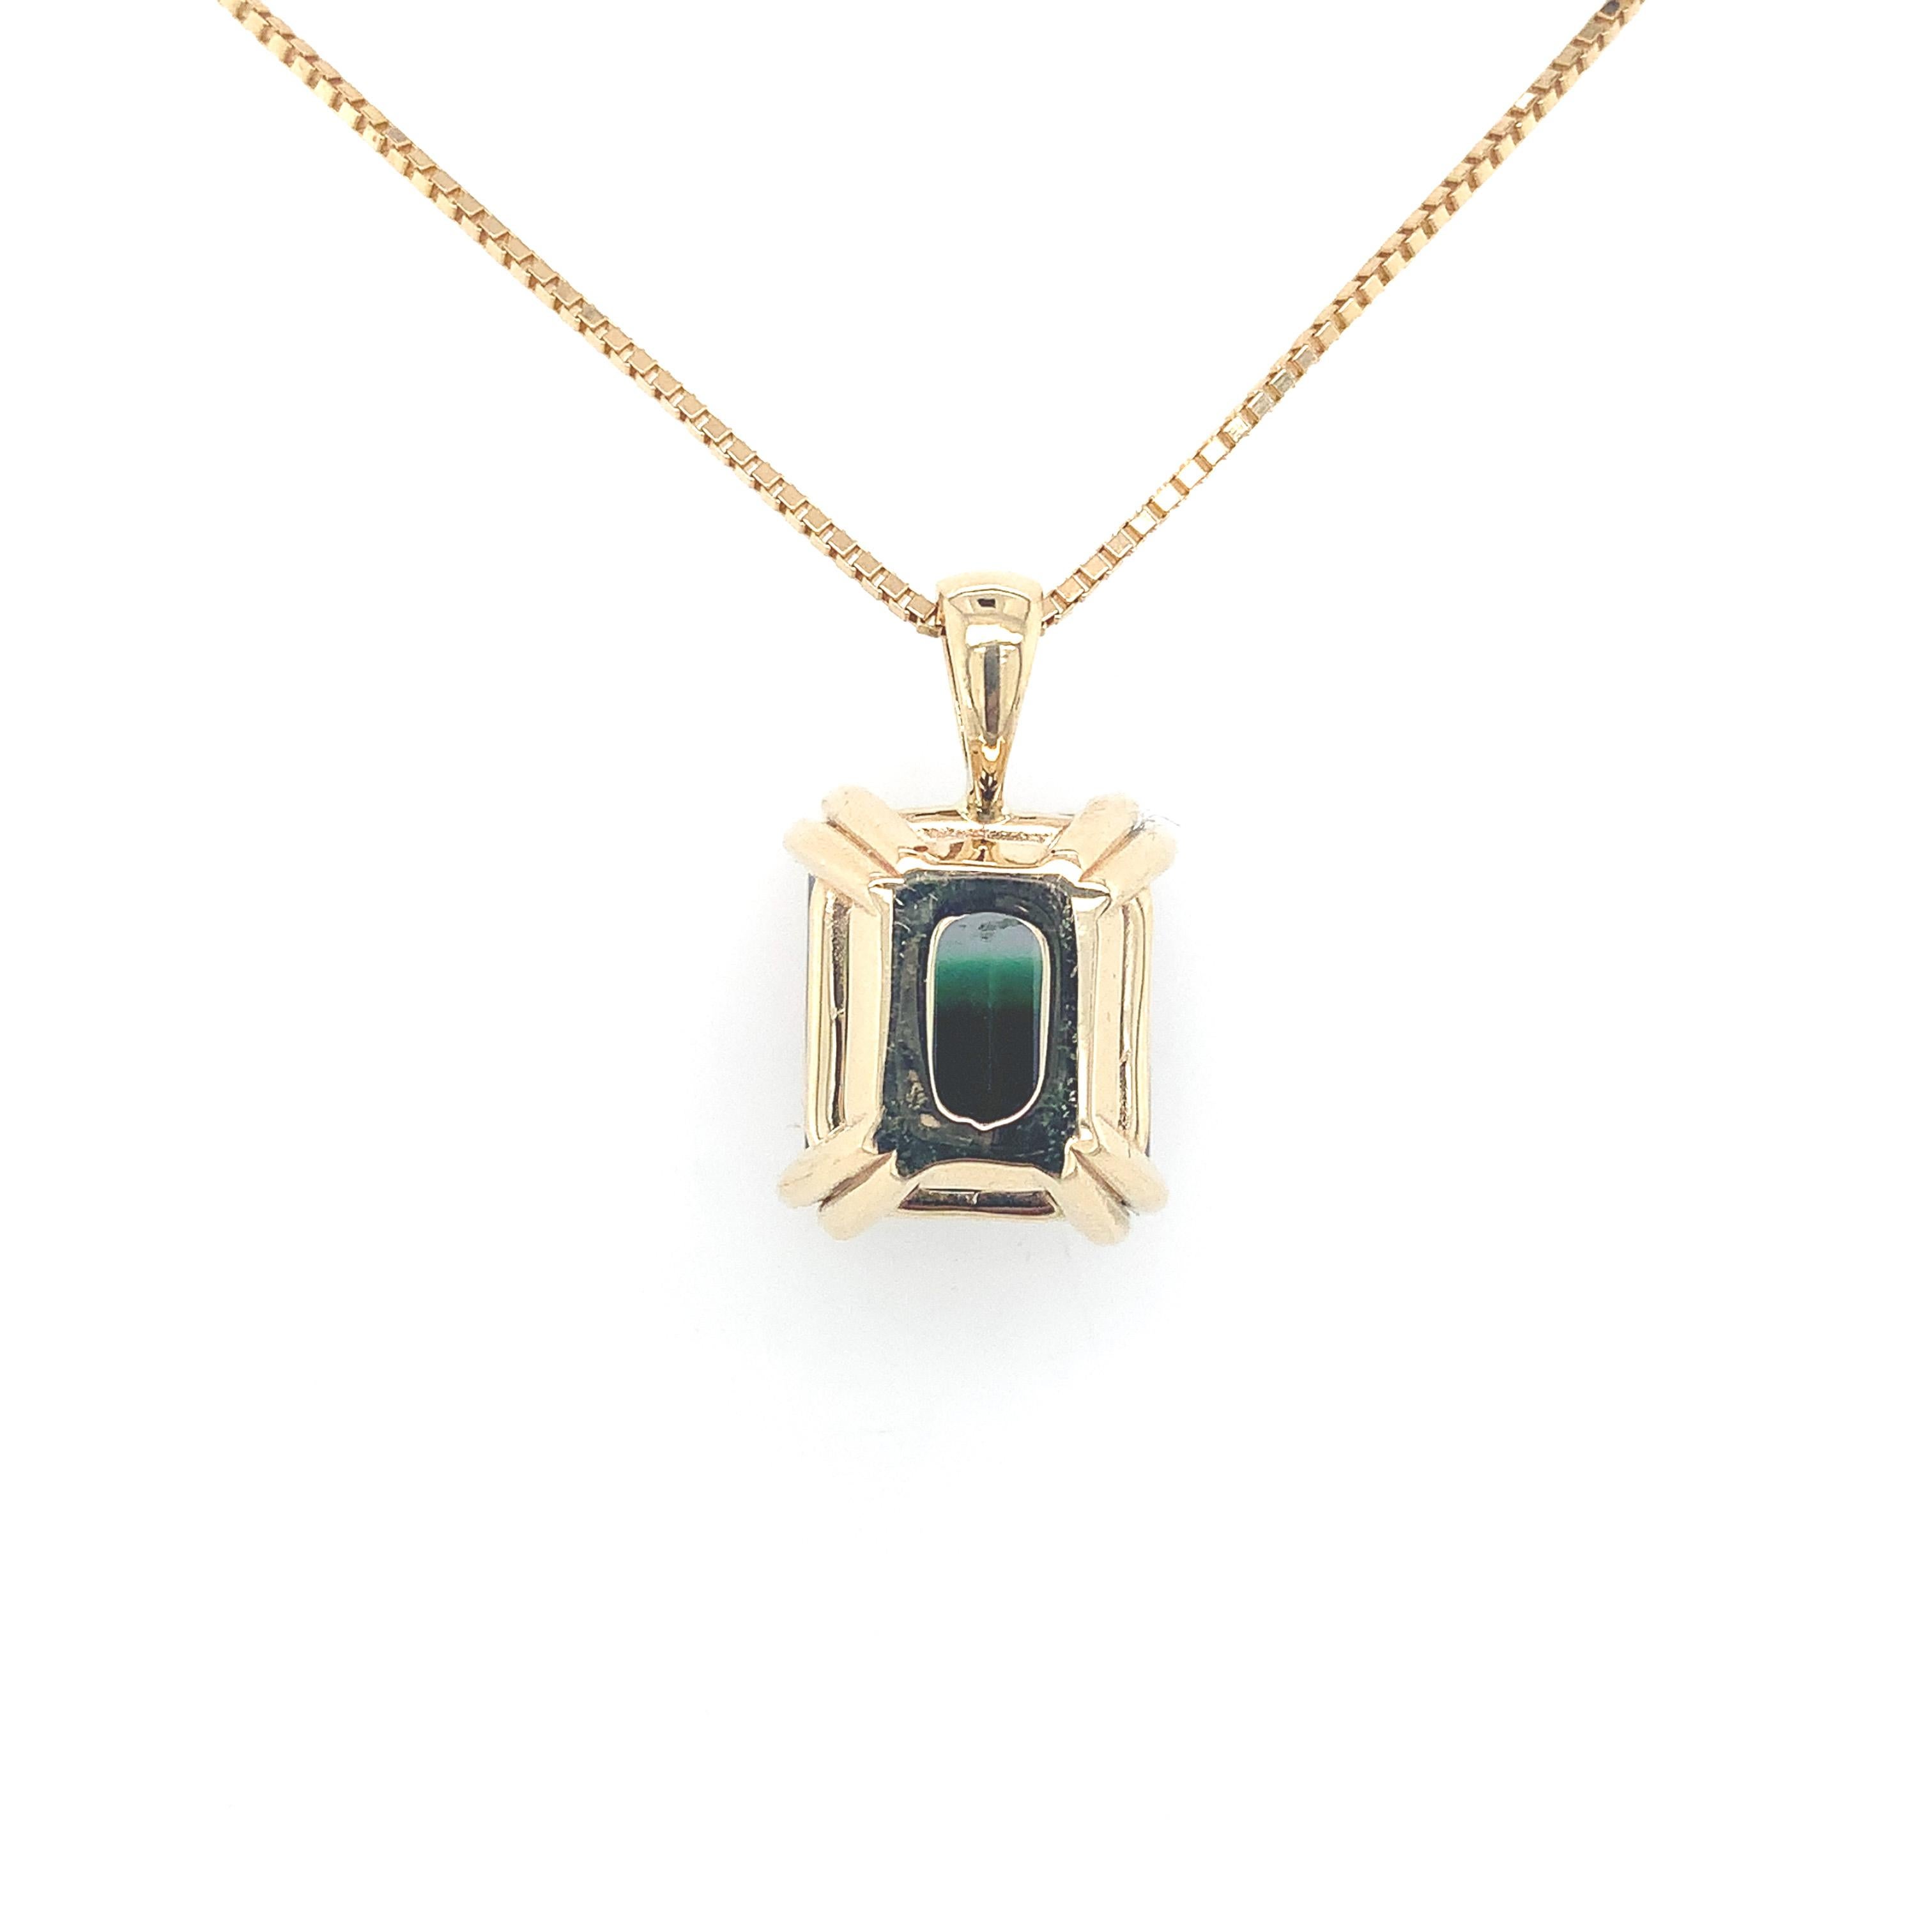 Modernist 14K Yellow Gold 7.92 carat Bi-Color Tourmaline Pendant with chain For Sale